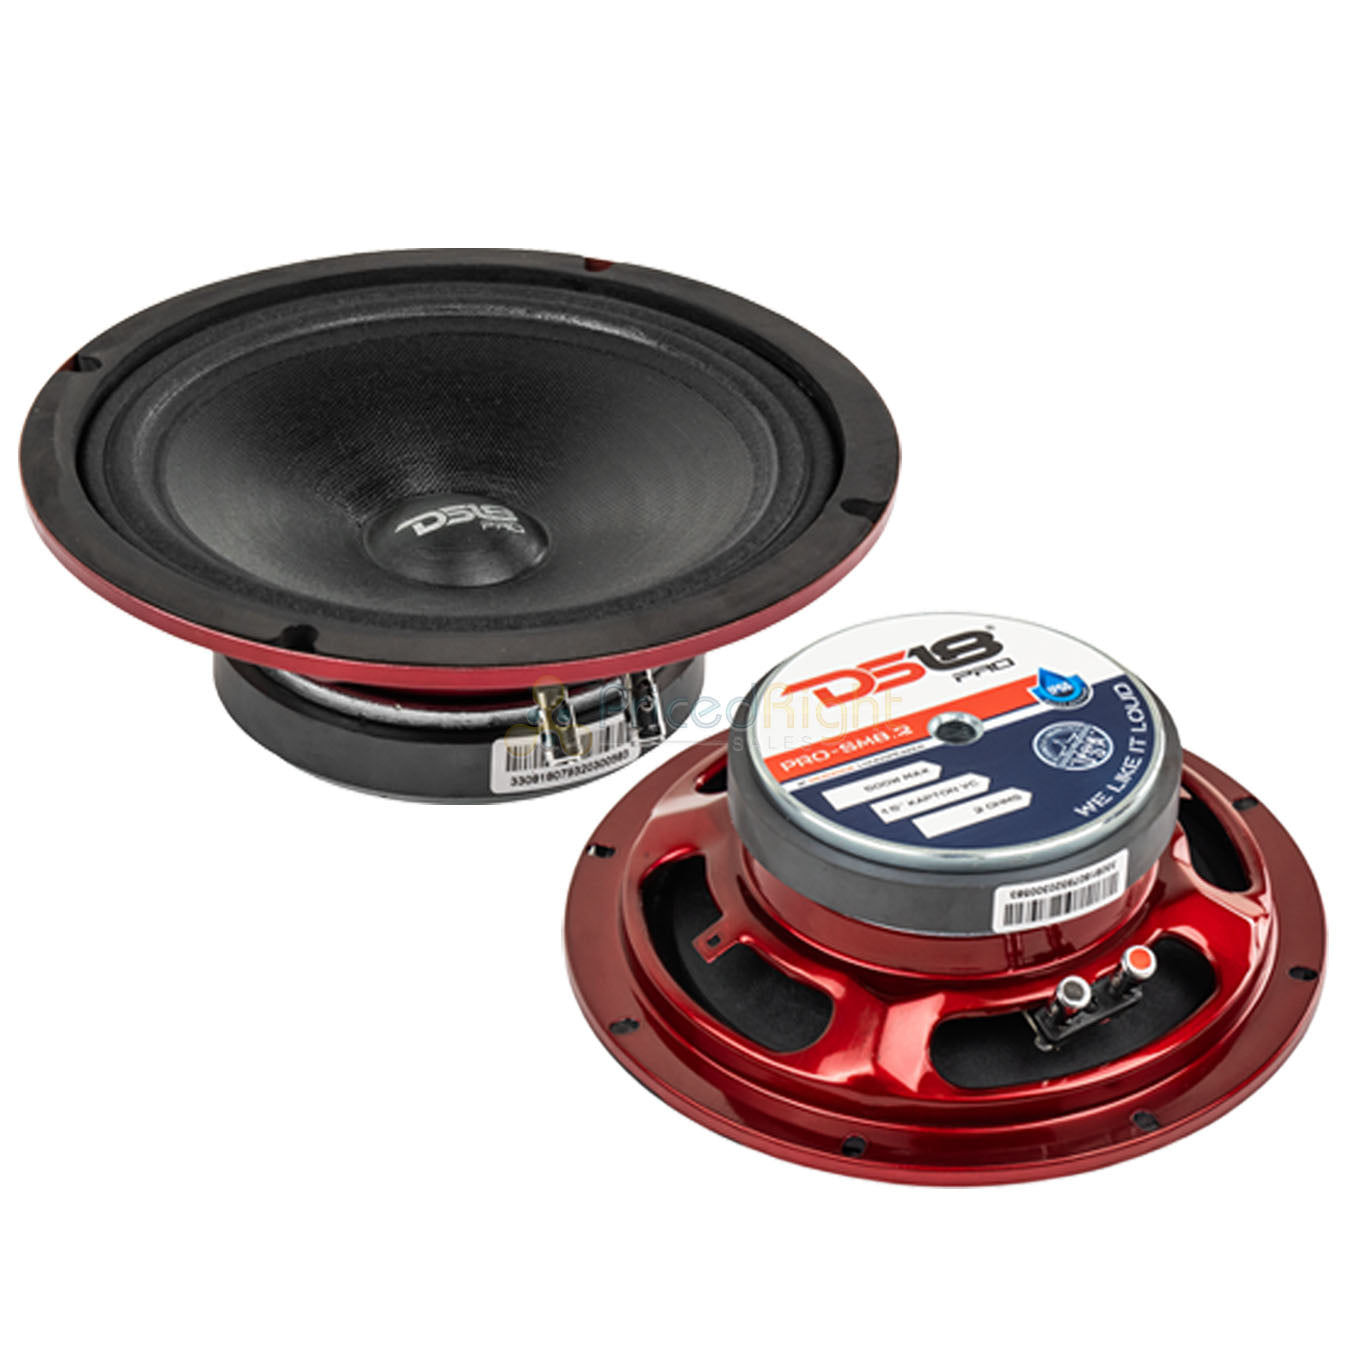 DS18 PRO-SM8.2 8" Motorcycle Midrange Speakers 500W Max 2 Ohm IP66 Rated 2 Pack